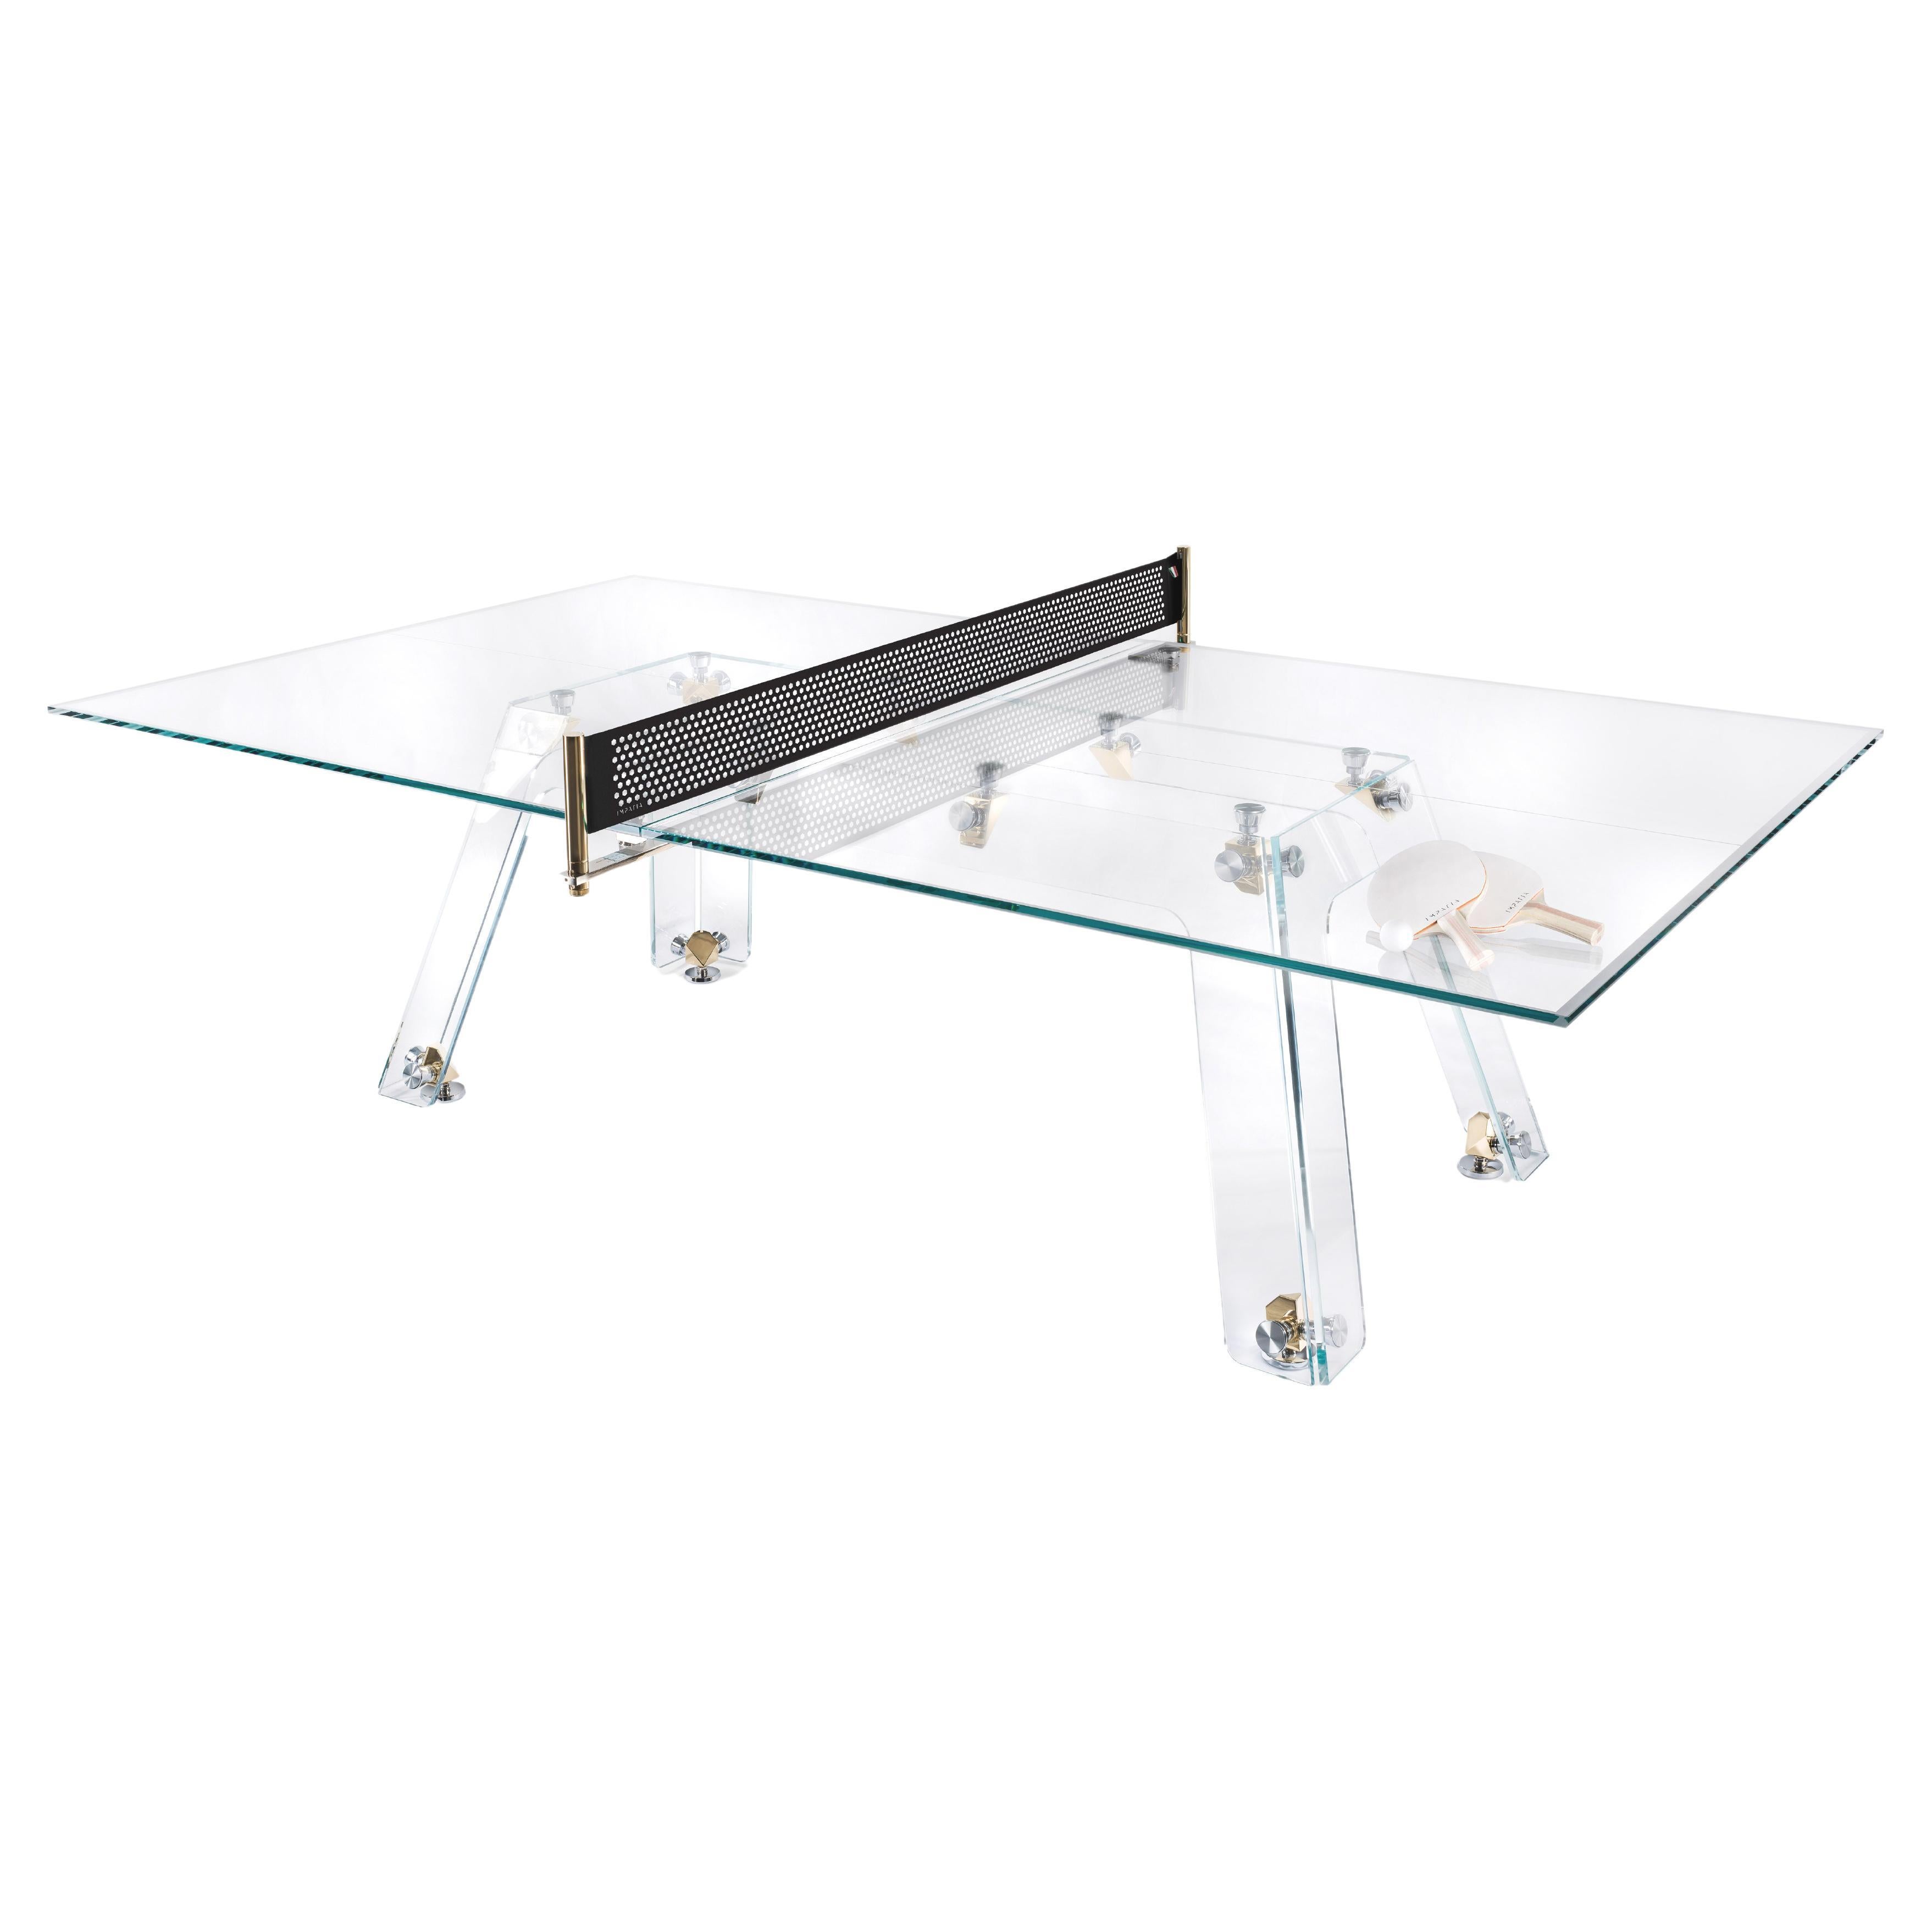 Lungolinea Gold Table Tennis by Impatia